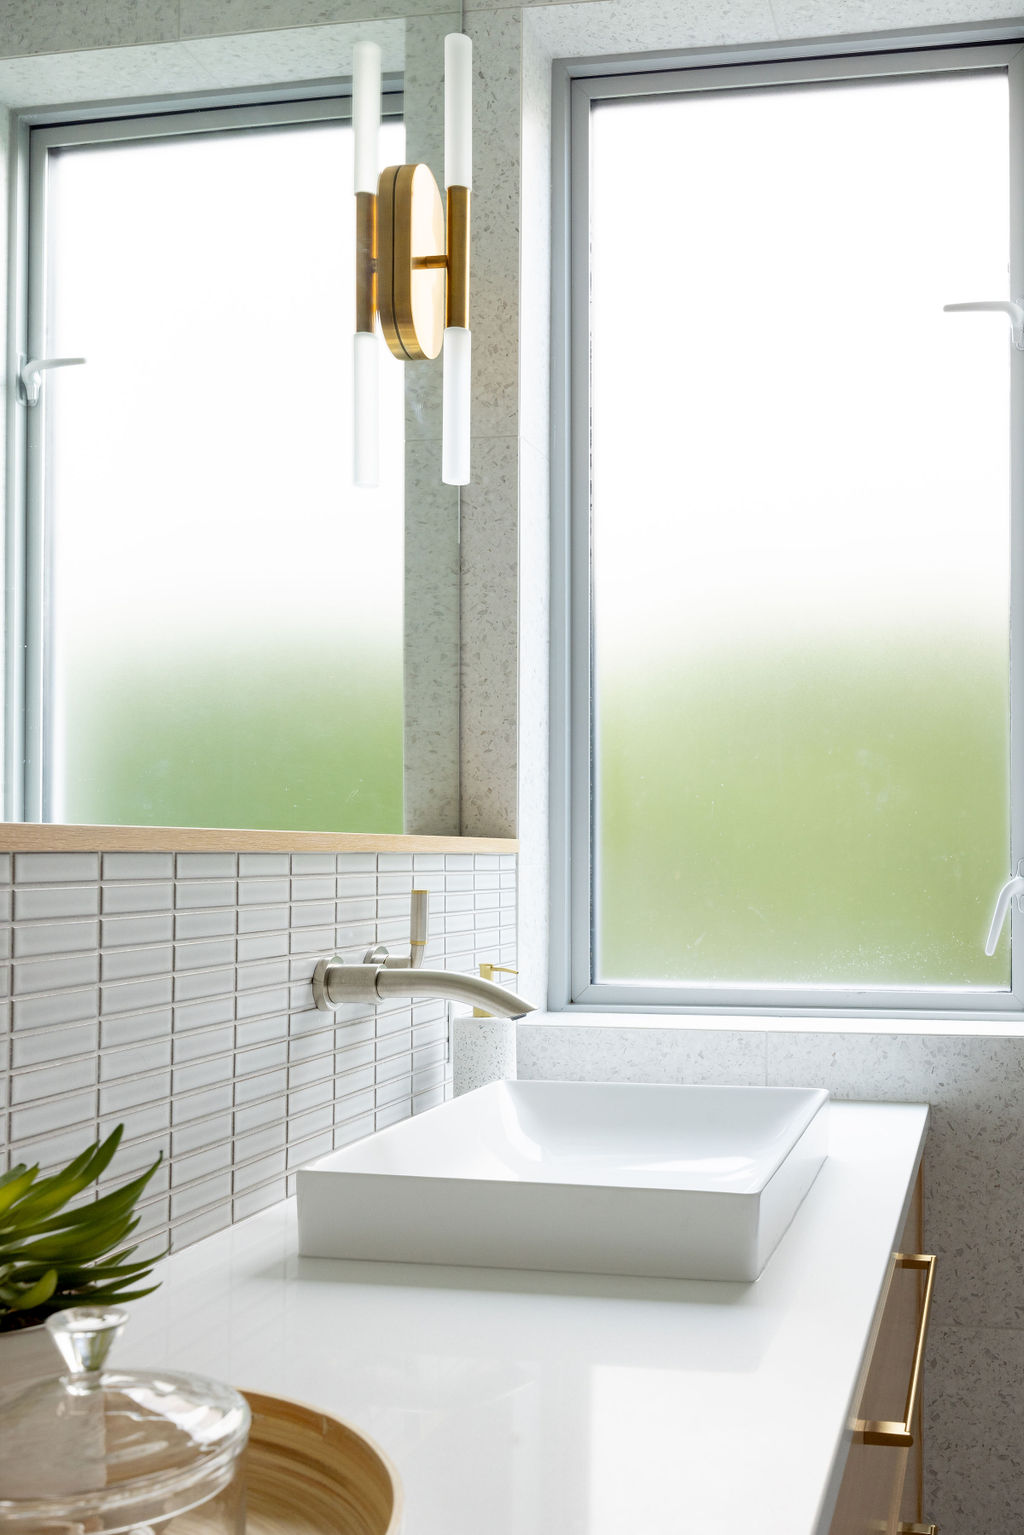 Modern bathroom with high-end finishes